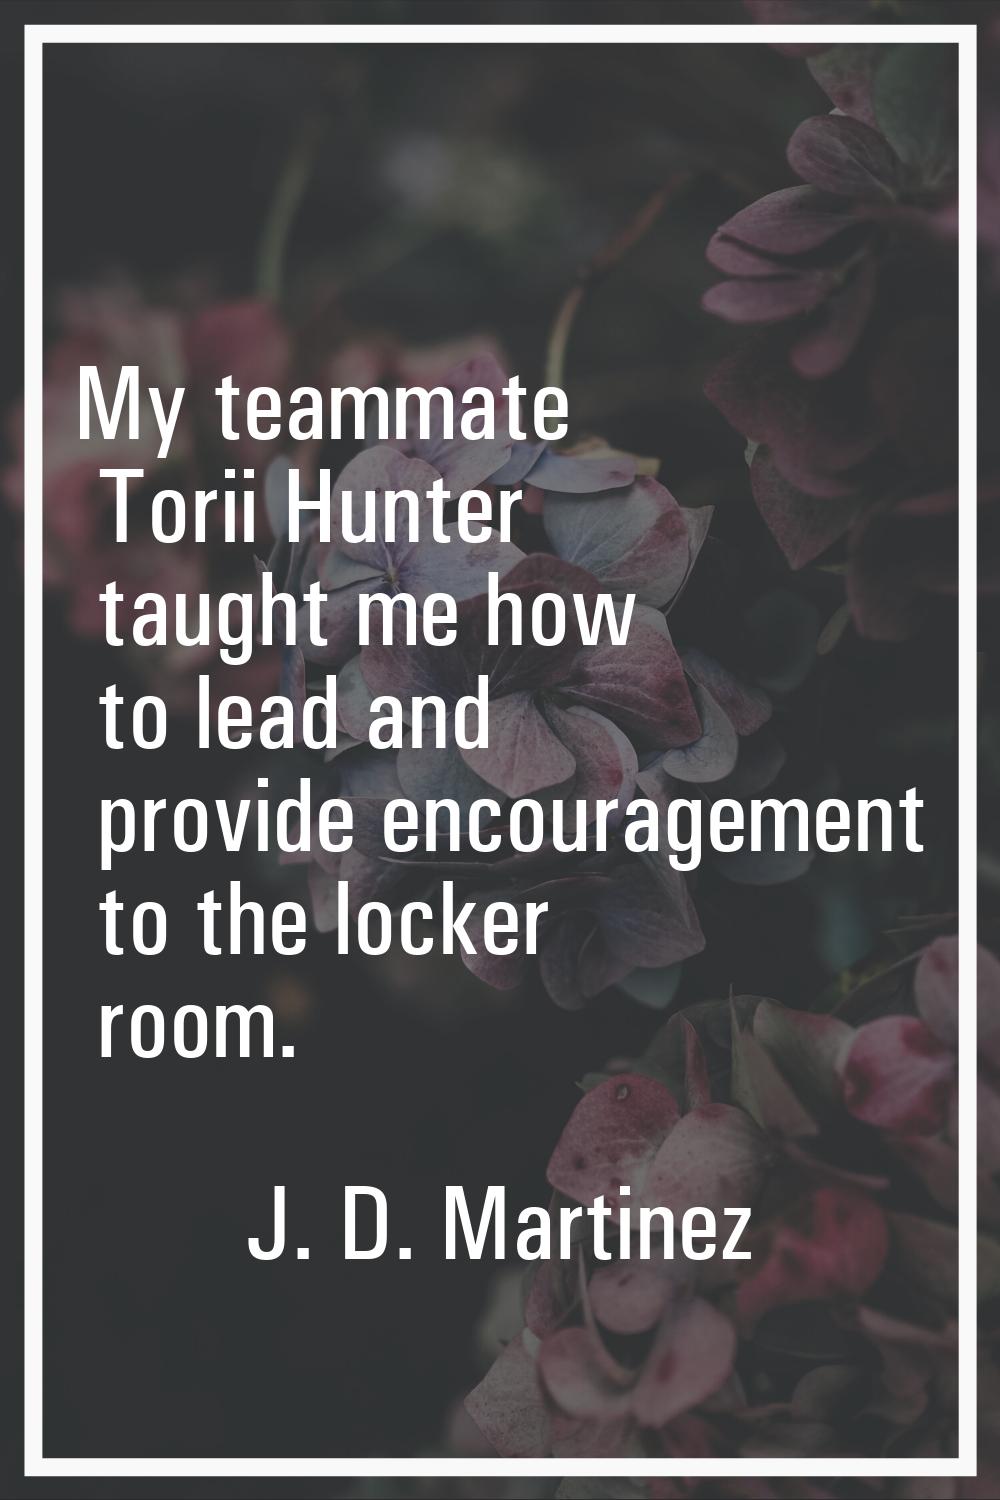 My teammate Torii Hunter taught me how to lead and provide encouragement to the locker room.